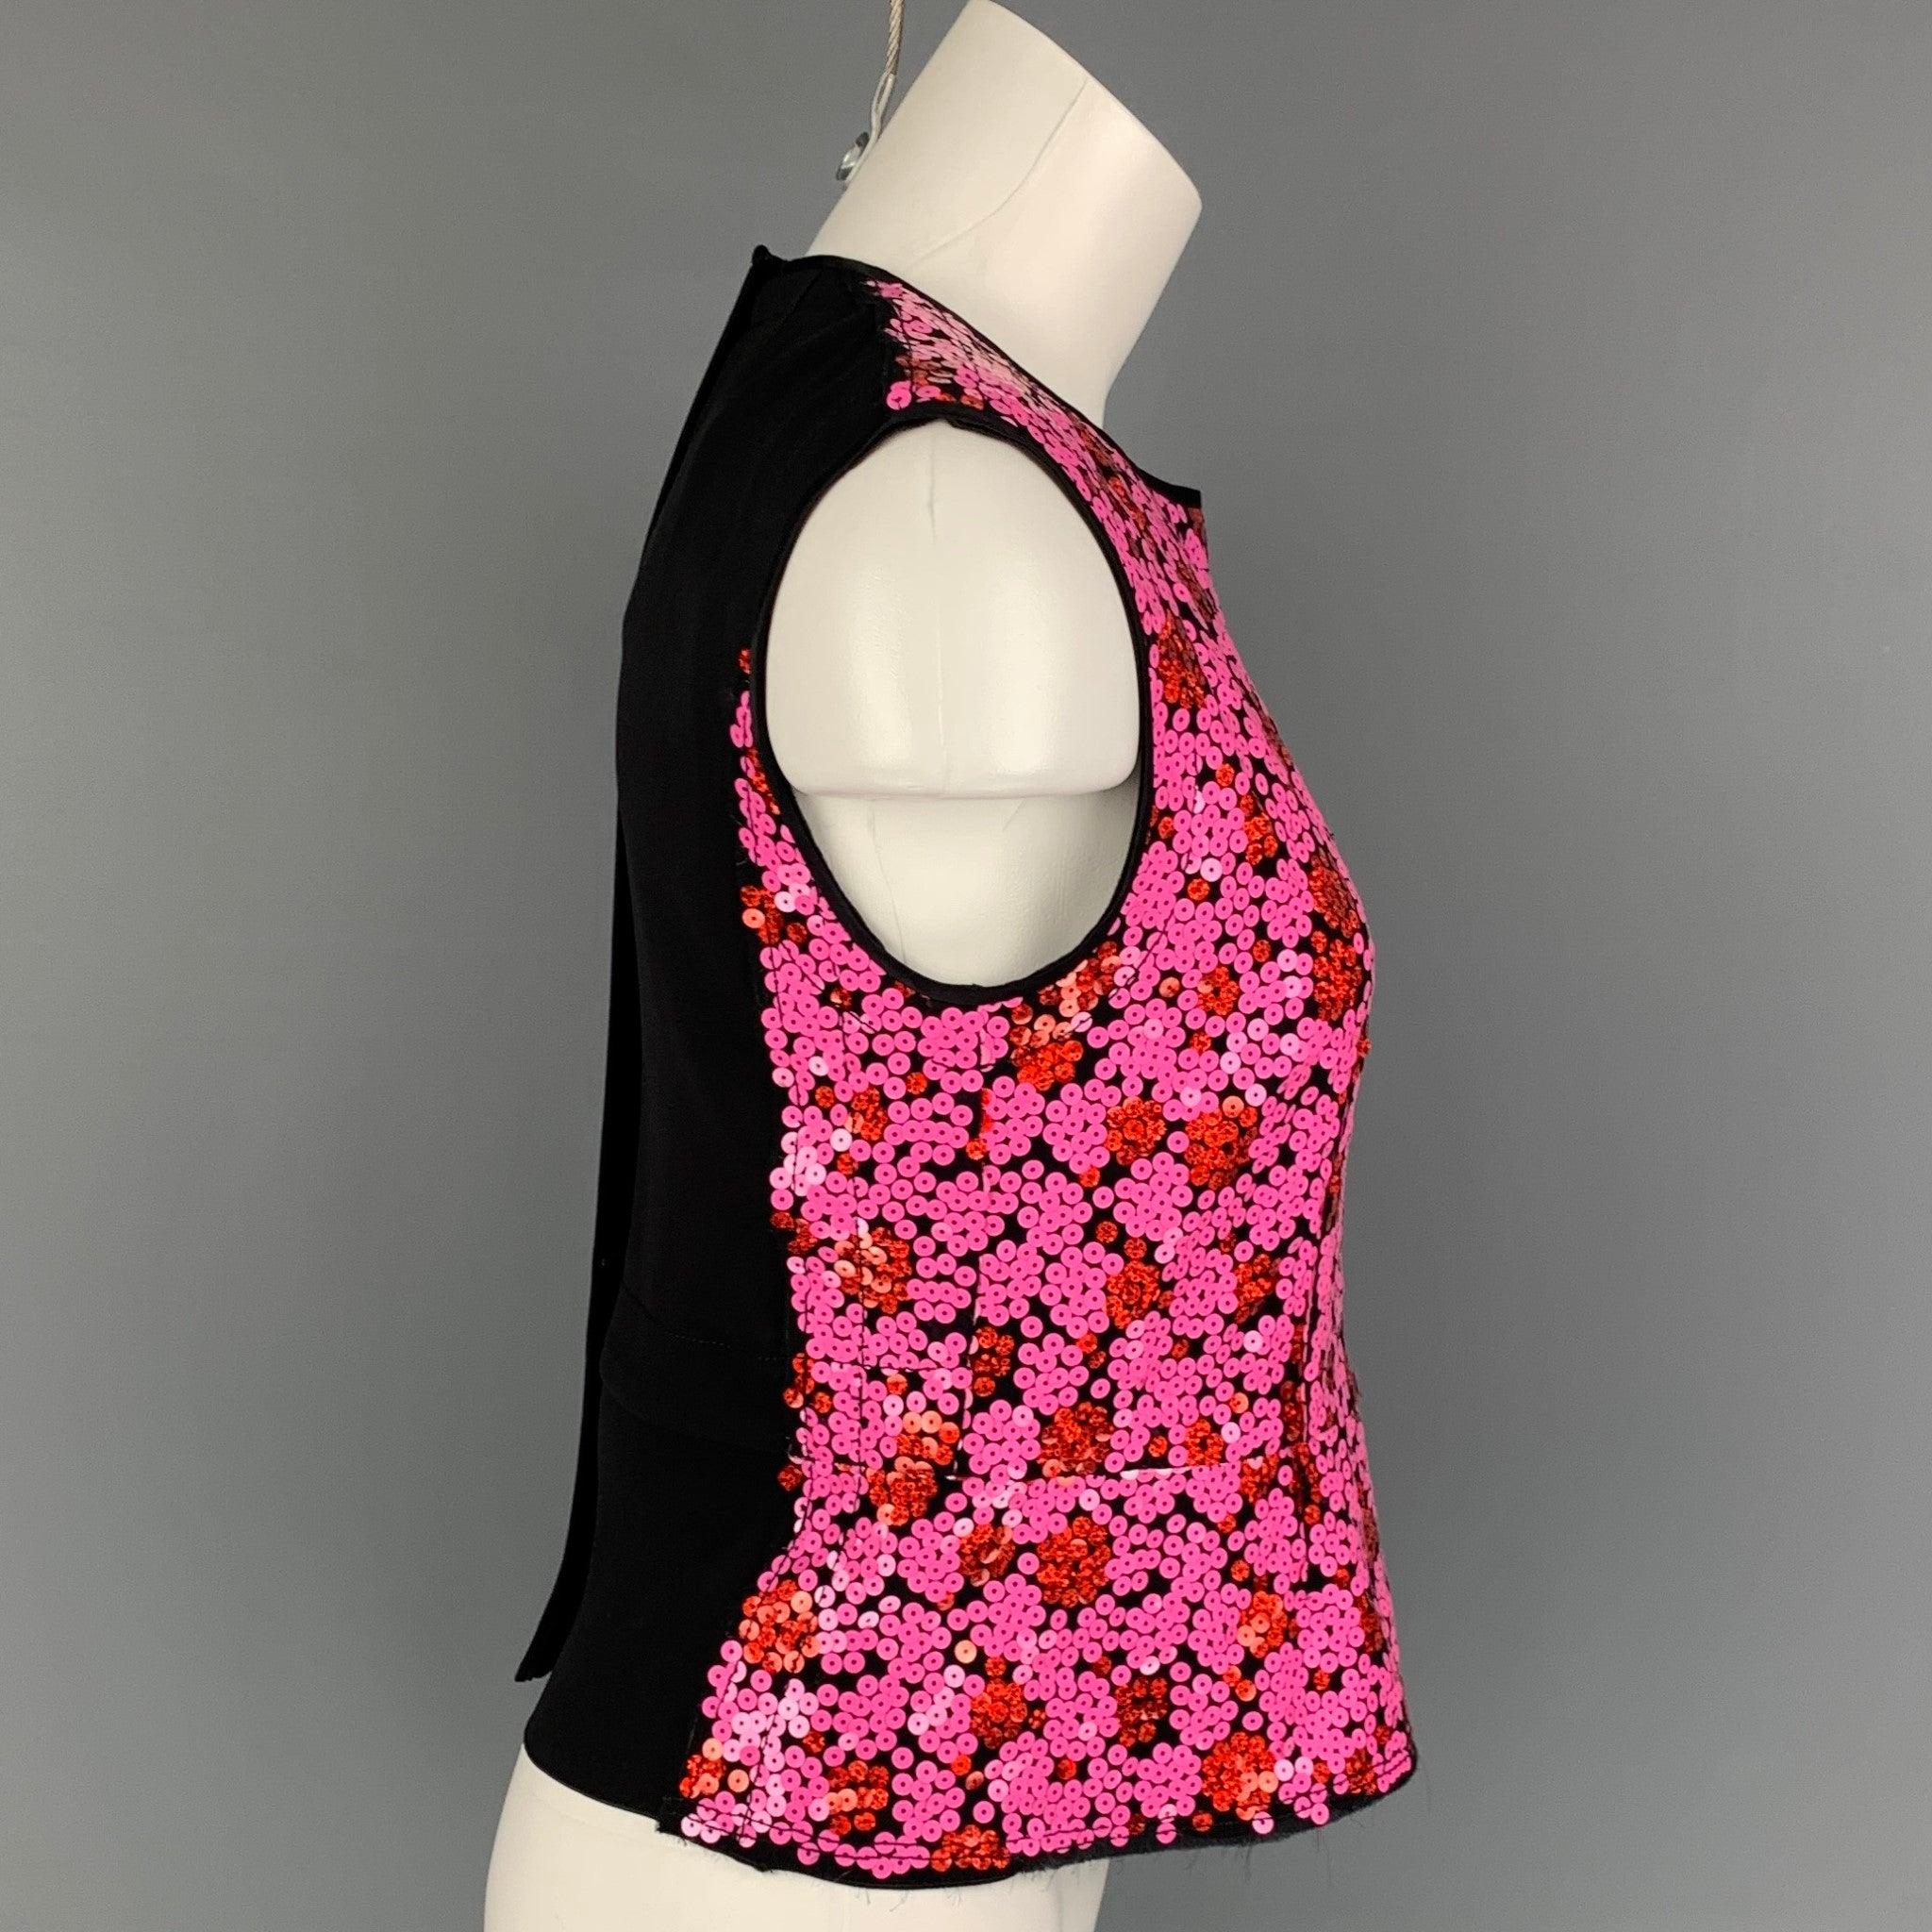 MARC JACOBS dress top comes in a pink & black sequin polyester featuring a back black panel, sleeveless, and a back zip up closure.
Very Good
Pre-Owned Condition. 

Marked:   4 

Measurements: 
 
Shoulder: 16 inches  Bust:
34 inches  Length: 20